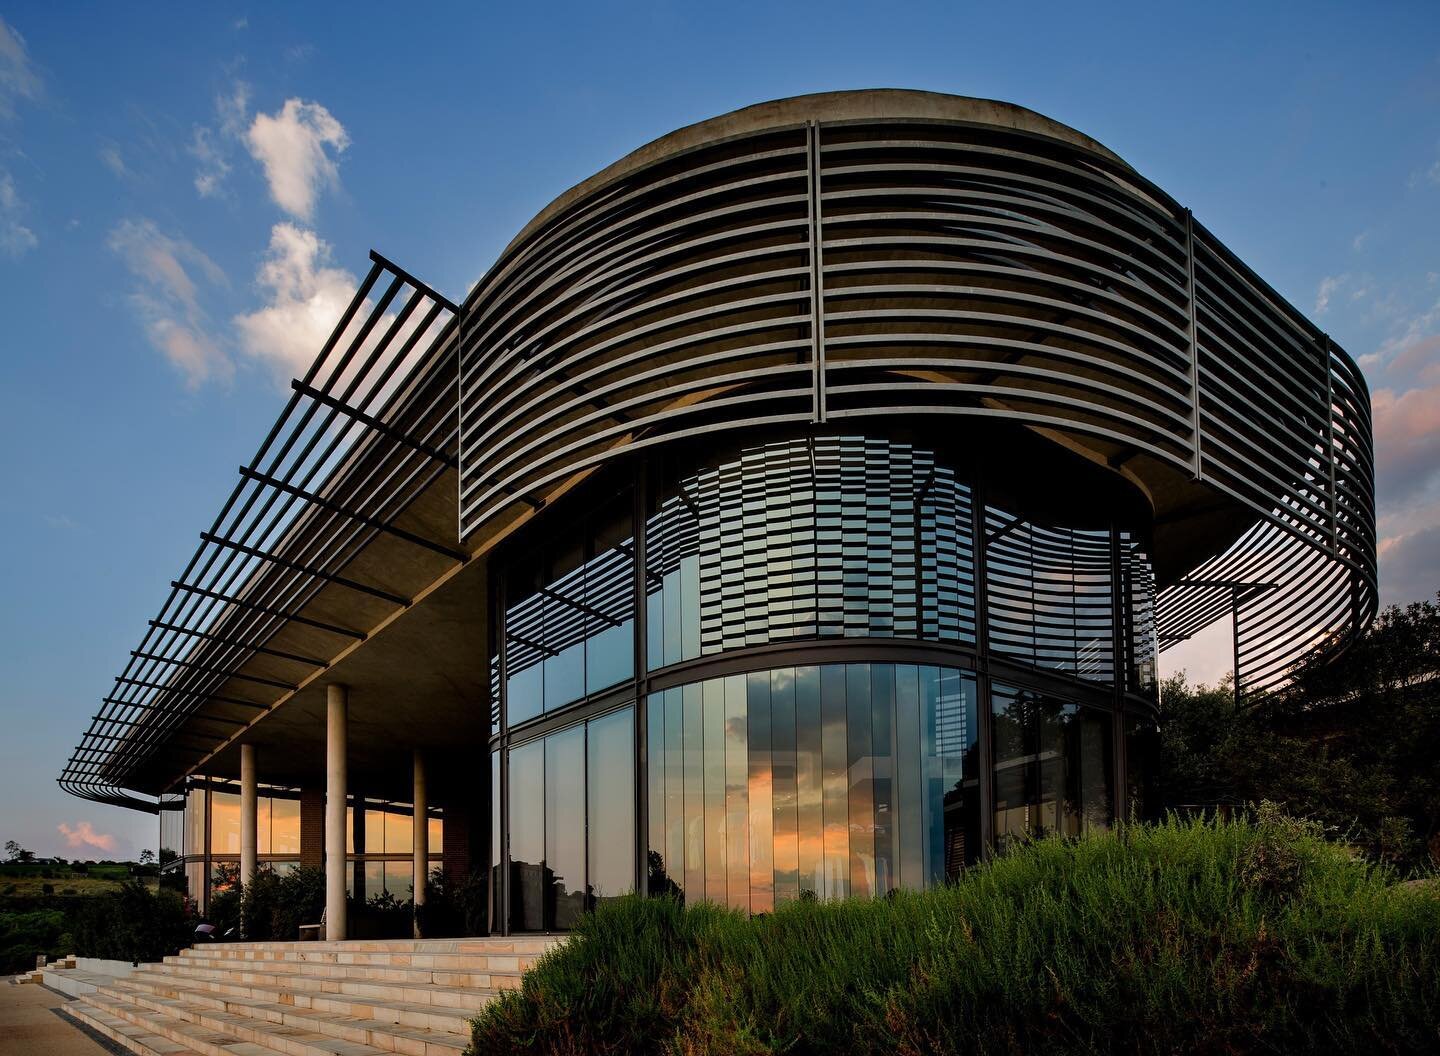 Steyn City Club House Completed in 2016,⁠
Pure Consulting was appointed as the Structural and Facade engineer for this beautiful building designed by Boogertman + Partners.⁠
⁠
#glass #architecturaldetail #designthinking #facade #design #detail #struc